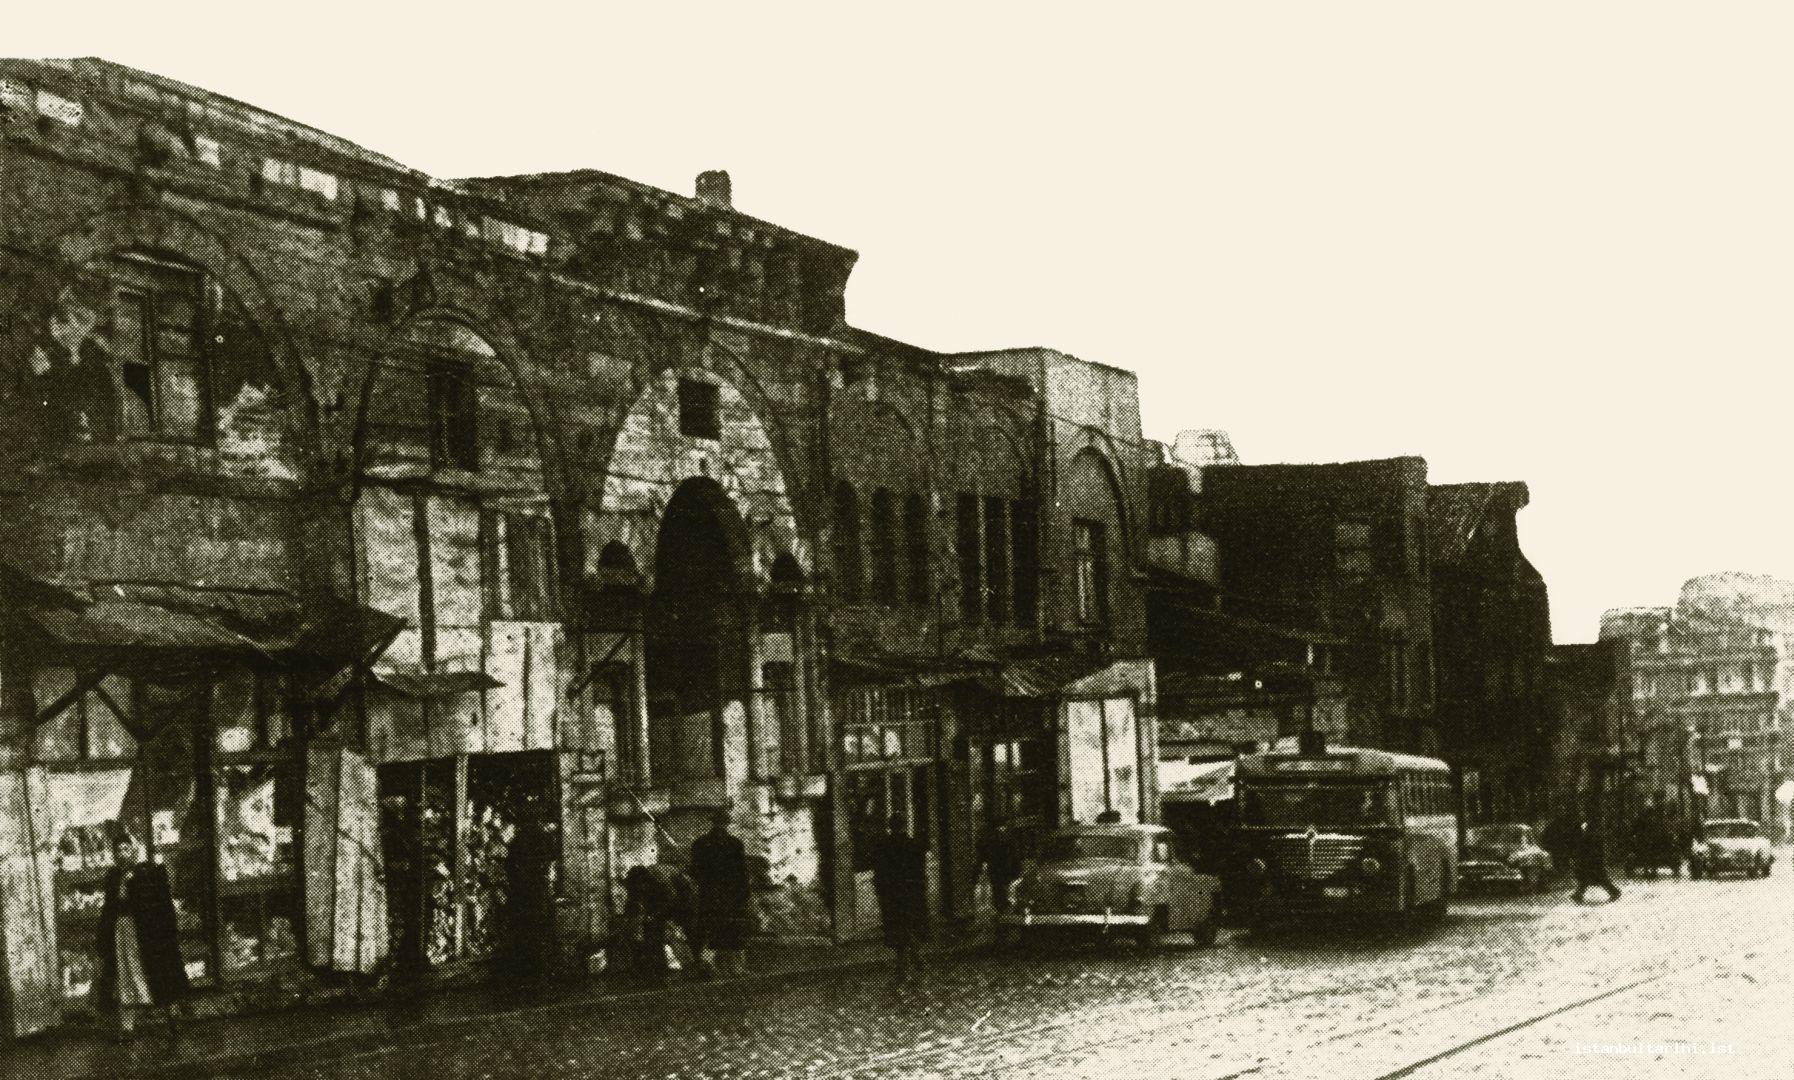 10a- Photographs taken during the works of expansion of Ordu Avenue which connects Beyazıt to Aksaray. In order to broaden the Avenue, parts of the magnificent works of Simkeşhane and Süleyman Paşa Han were destroyed and the remaining pieces of a victory arch from the period of Roman Empire was found.